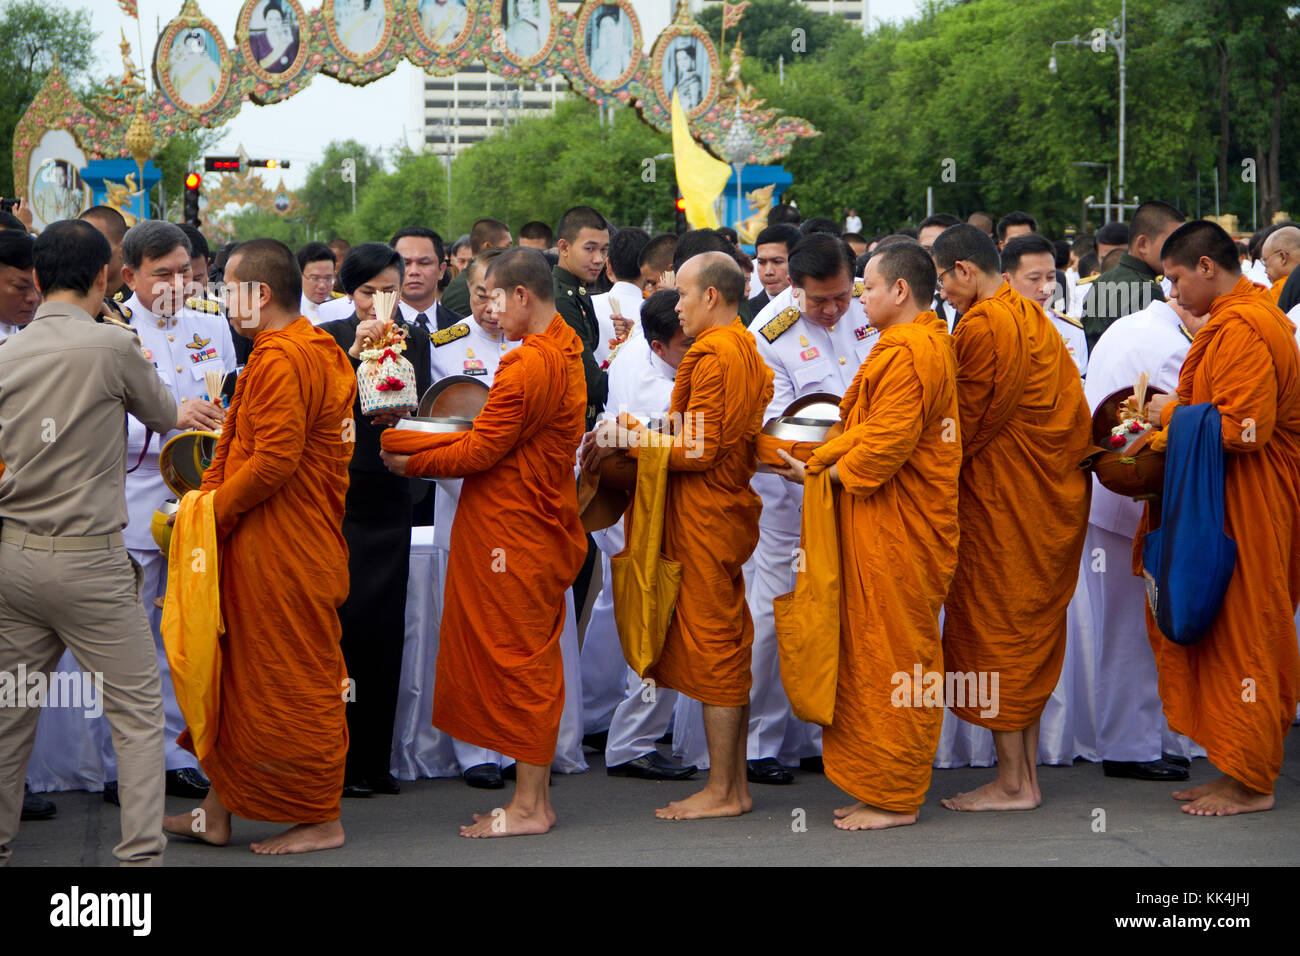 651 Buddhist monks attended the morning alms ceremony along with the Thai Prime Minister at Royal Plaza in Bangkok.Thailand celebrated the birthday of Stock Photo